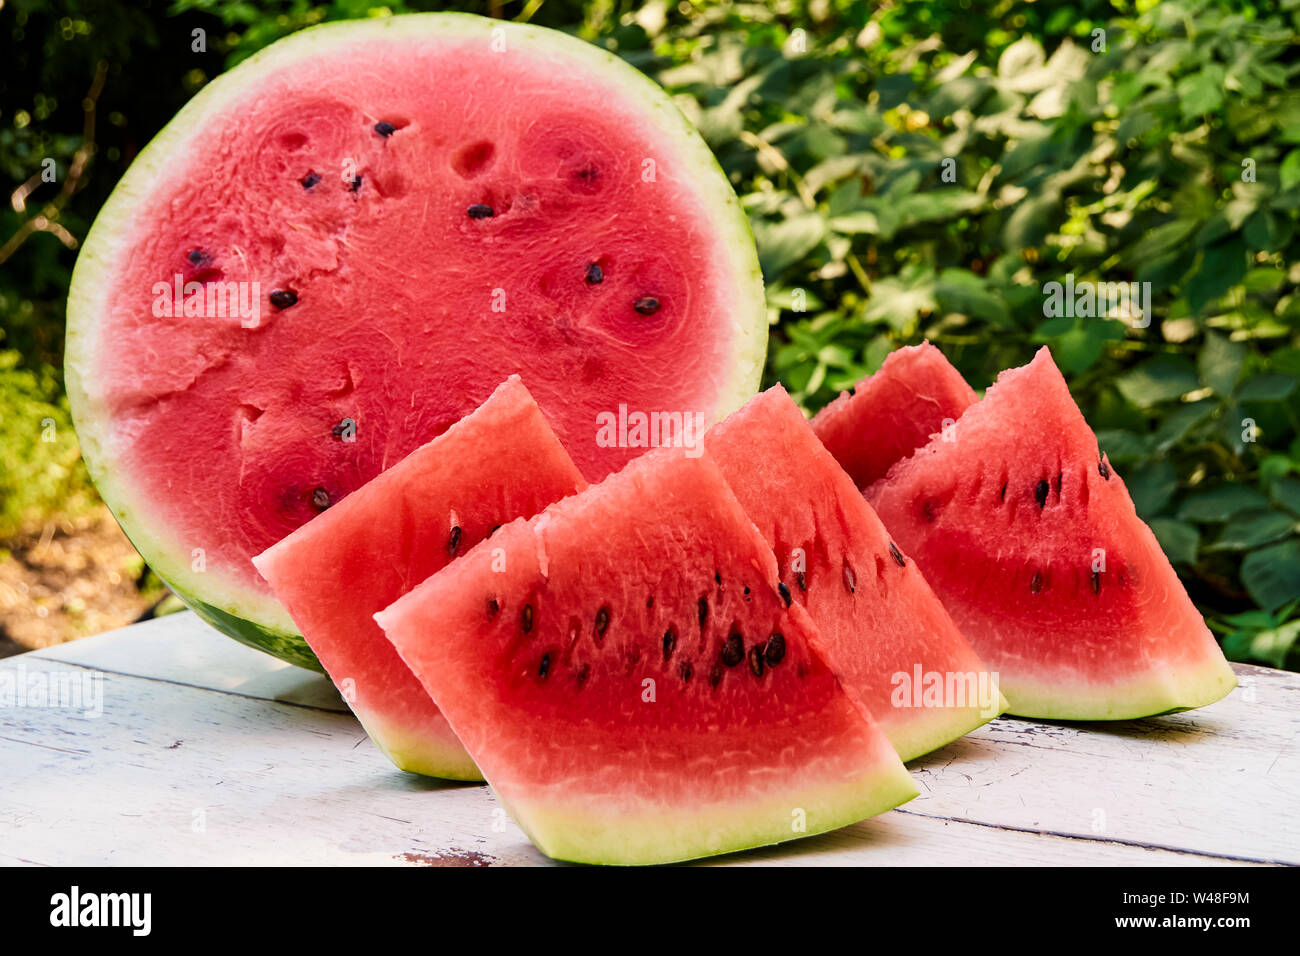 Fresh ripe striped sliced watermelon on a wooden old table, against the background of green leaves, outdoors. Stock Photo